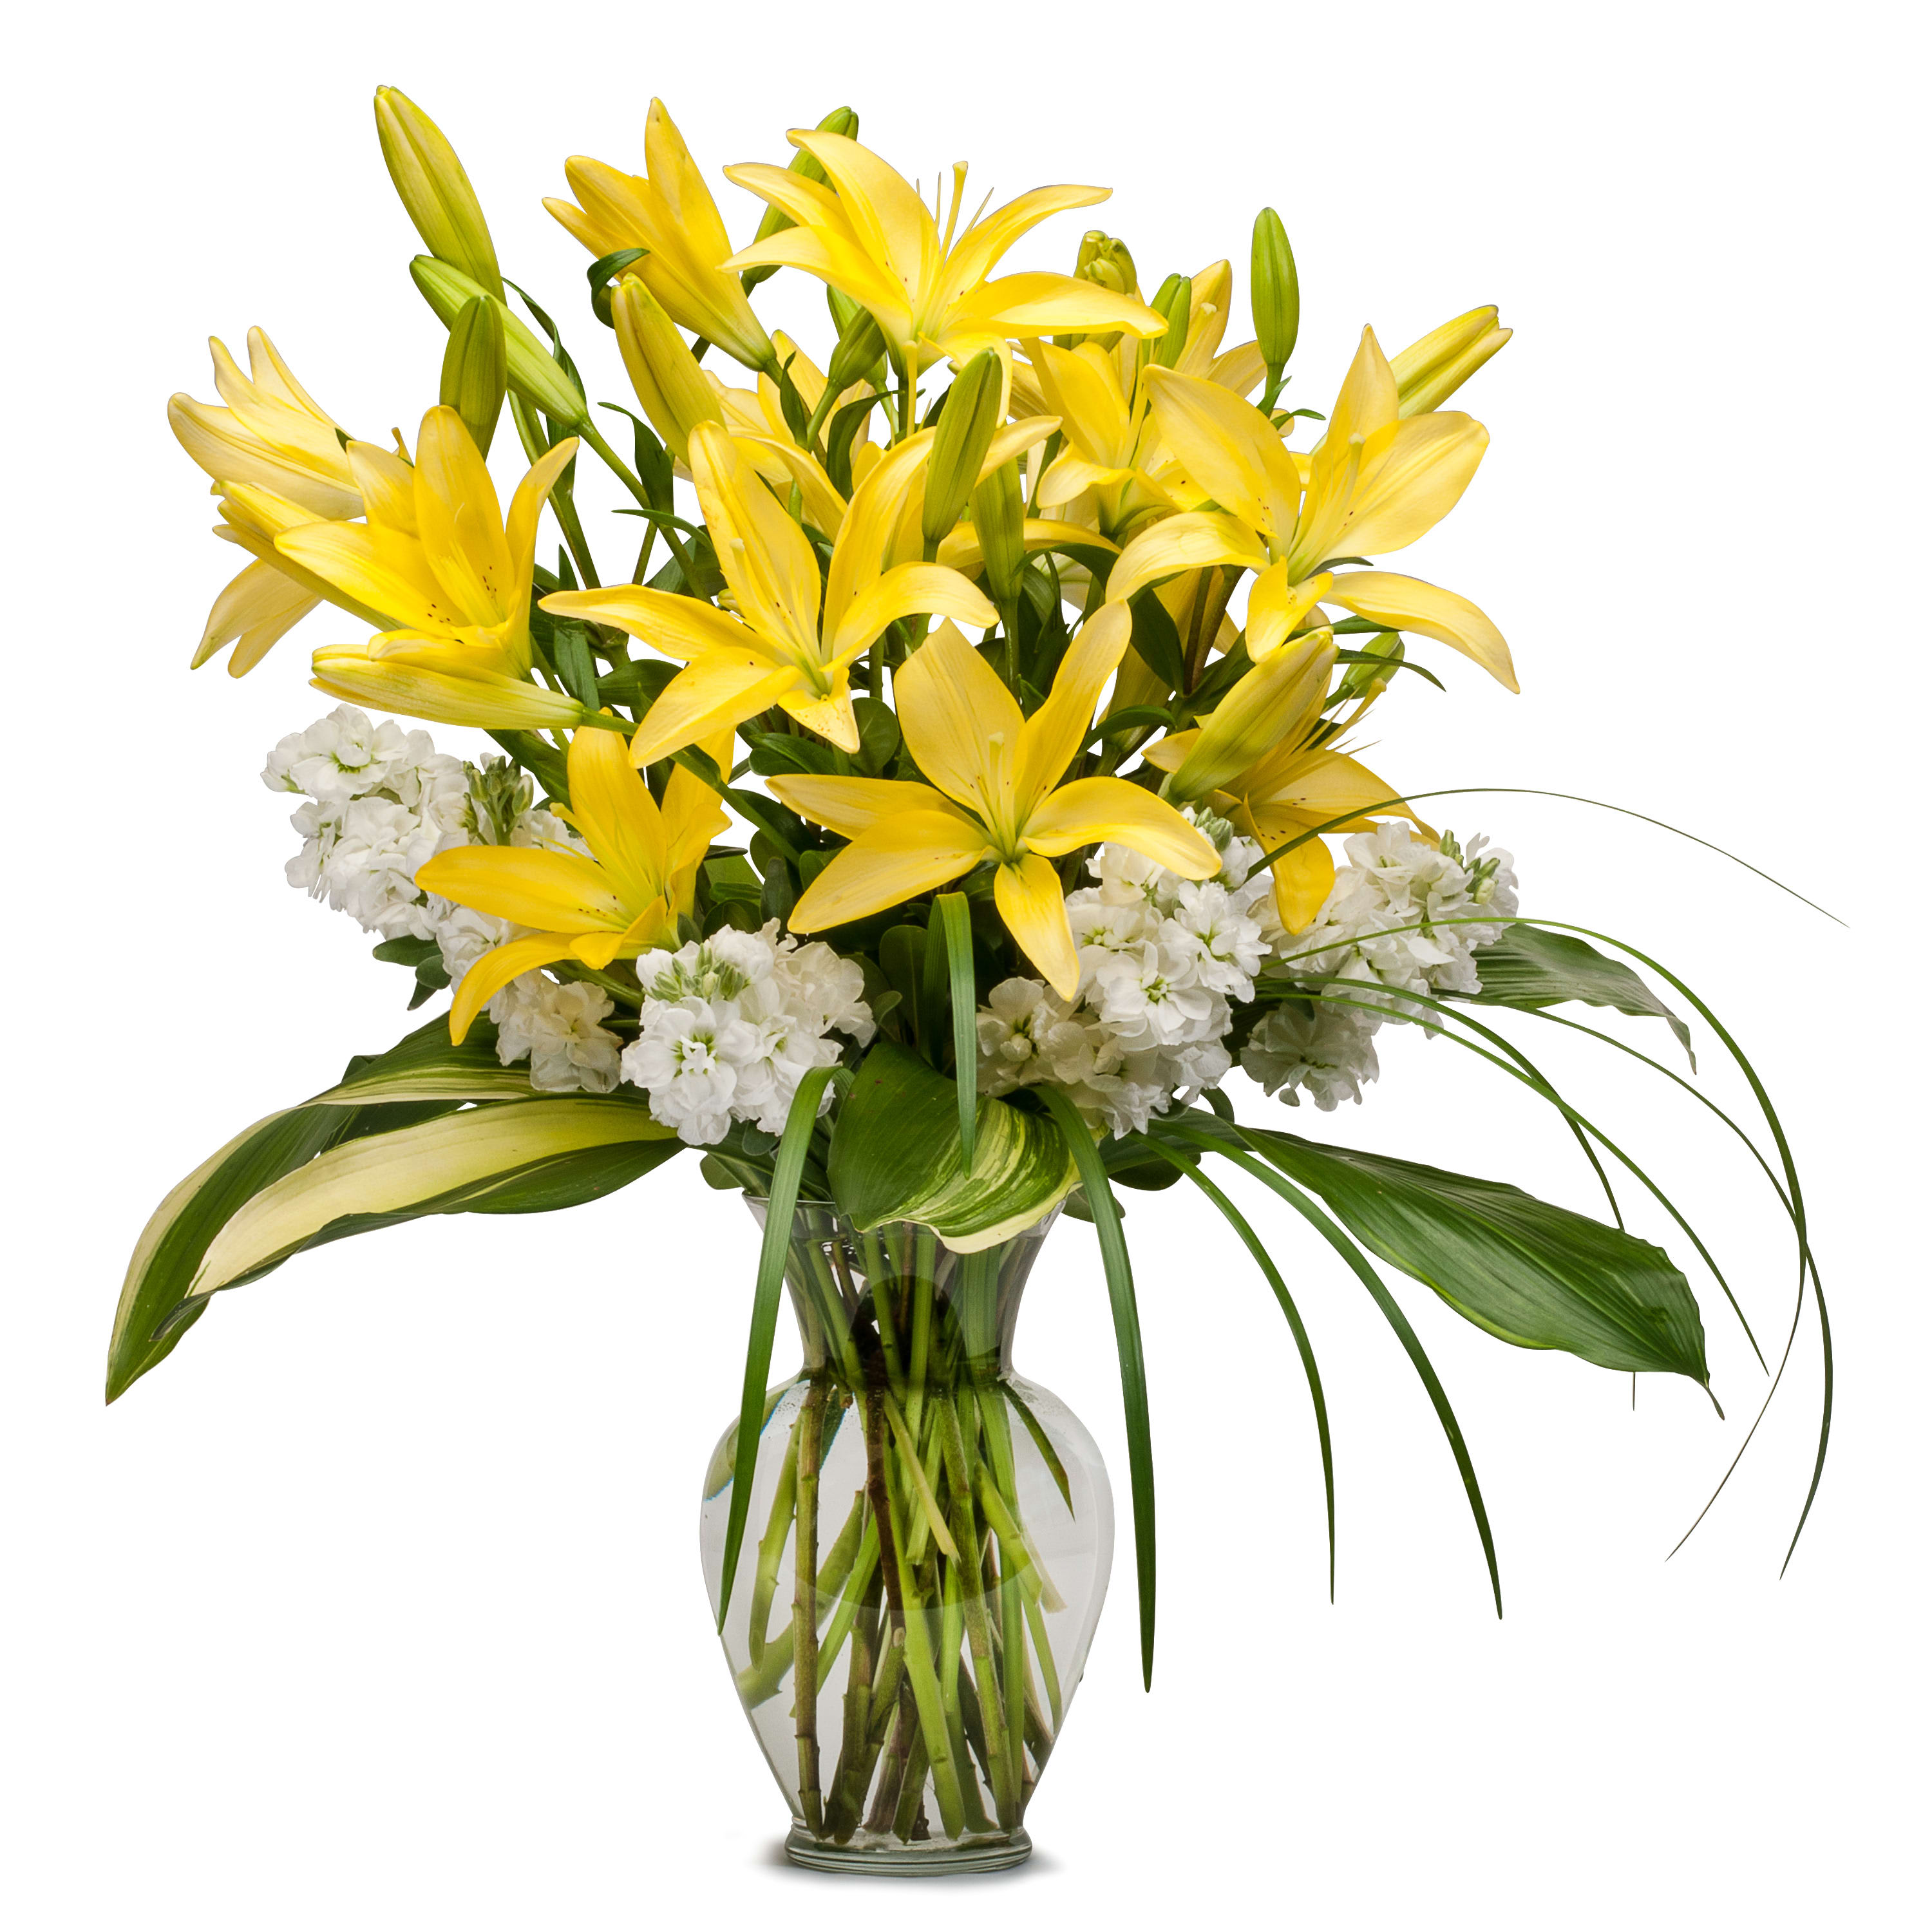 Lilies and Stock TMF13-219 - Yellow lilies combined with white stock blend beauty and fragrance to sweeten the occasion.